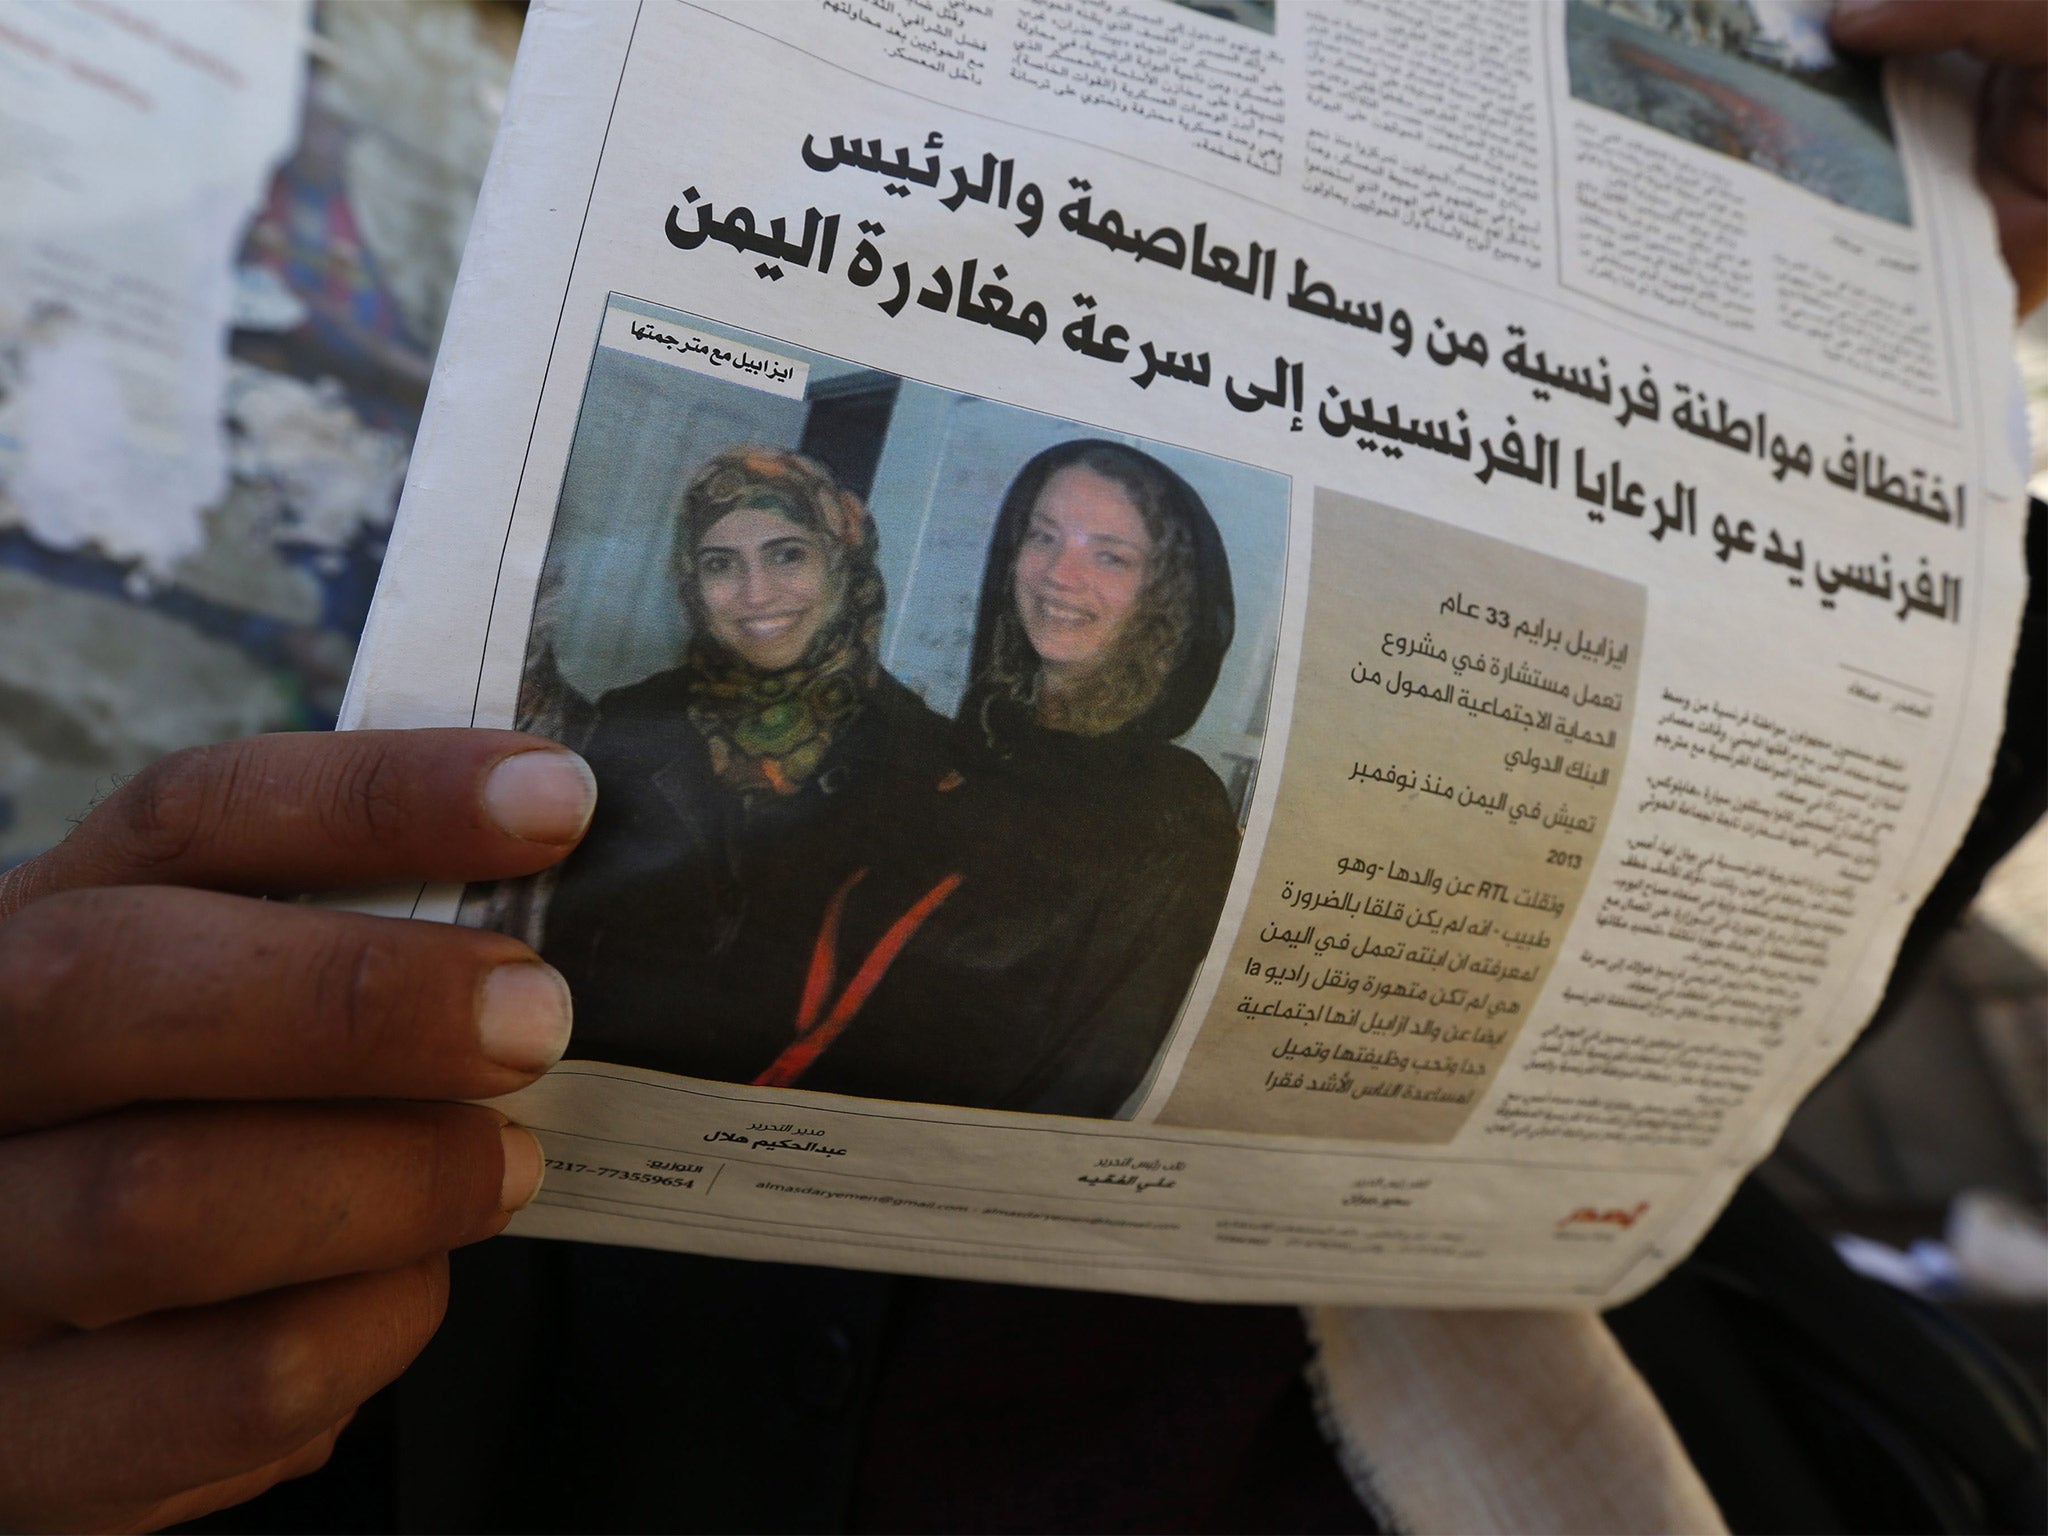 A Yemeni man reads a local newspaper publishing a photograph of kidnapped French aid worker Isabelle Prime (right) and her Yemeni colleague Shireen Makkauy